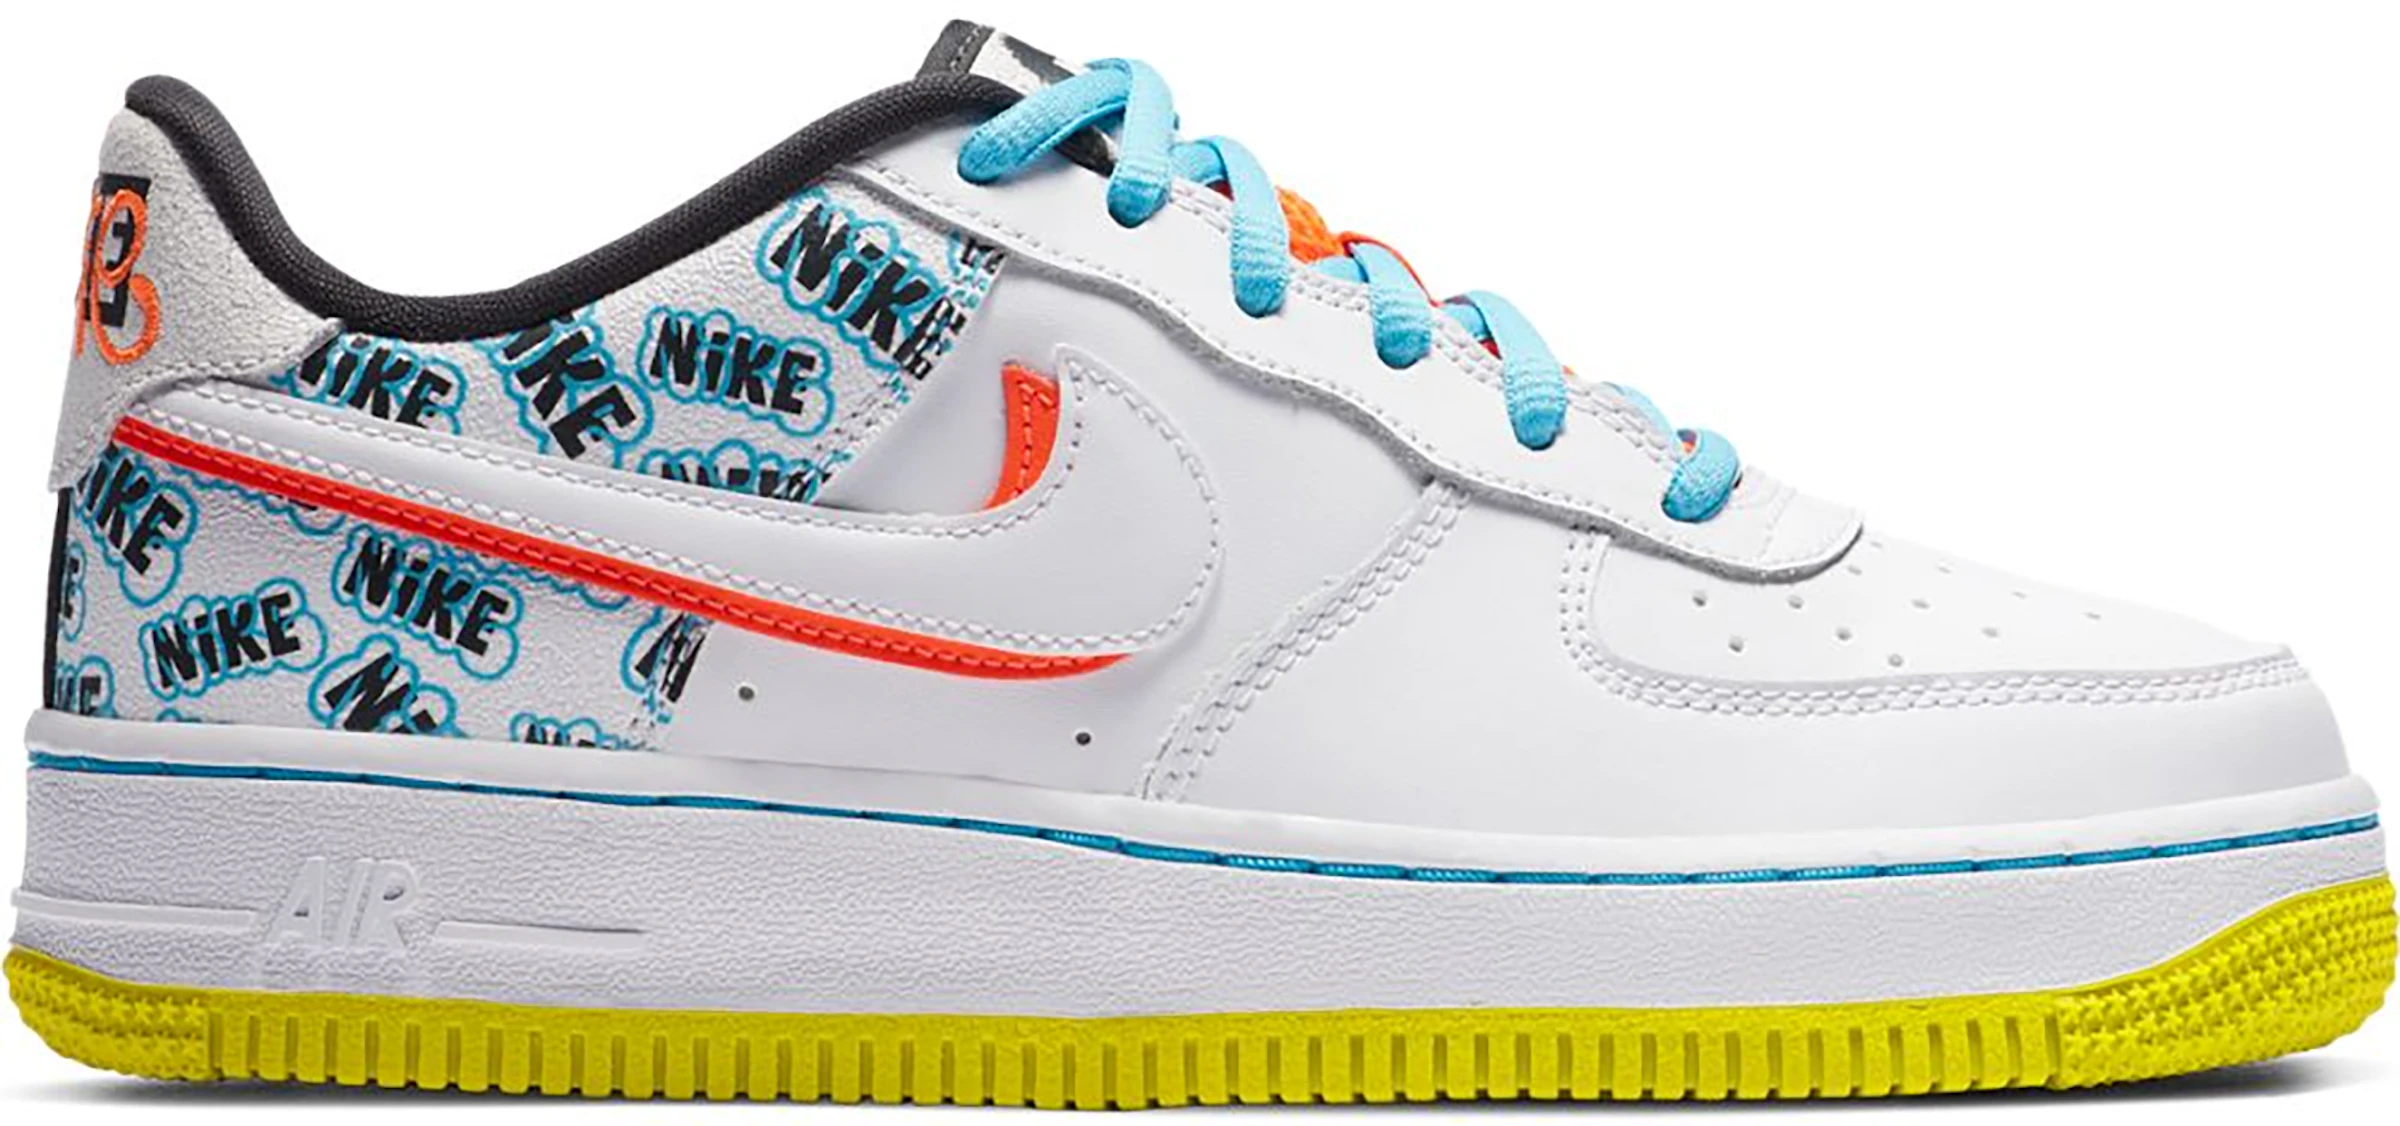 Nike Air Force Low Back To School (2020) - CZ8139-100 - US